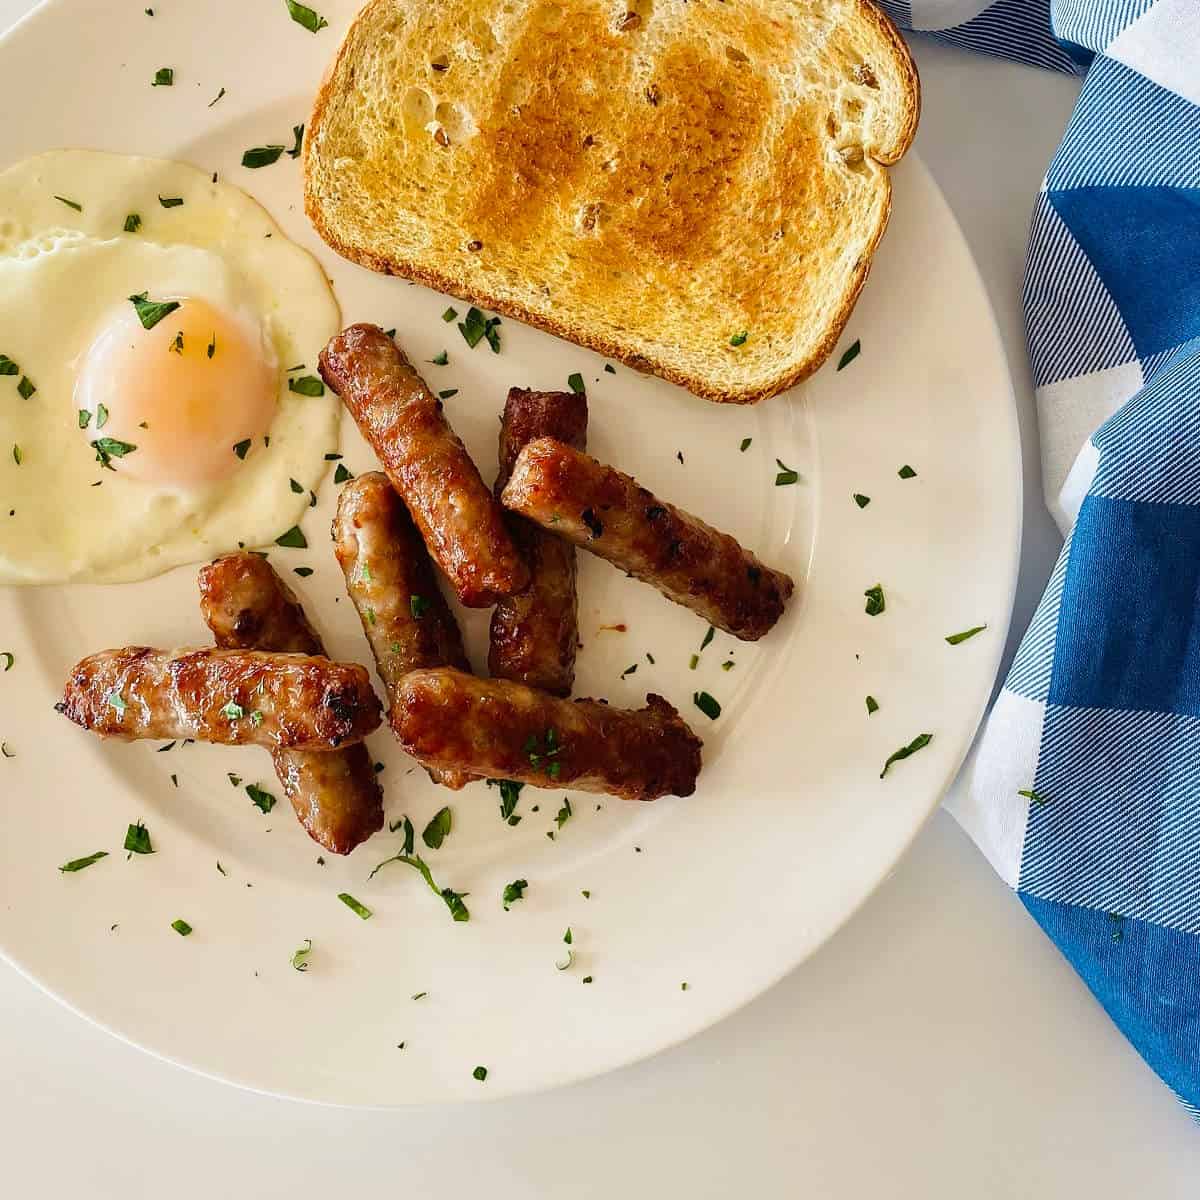 breakfast sausage links cooked in air fryer on plate with eggs and toast